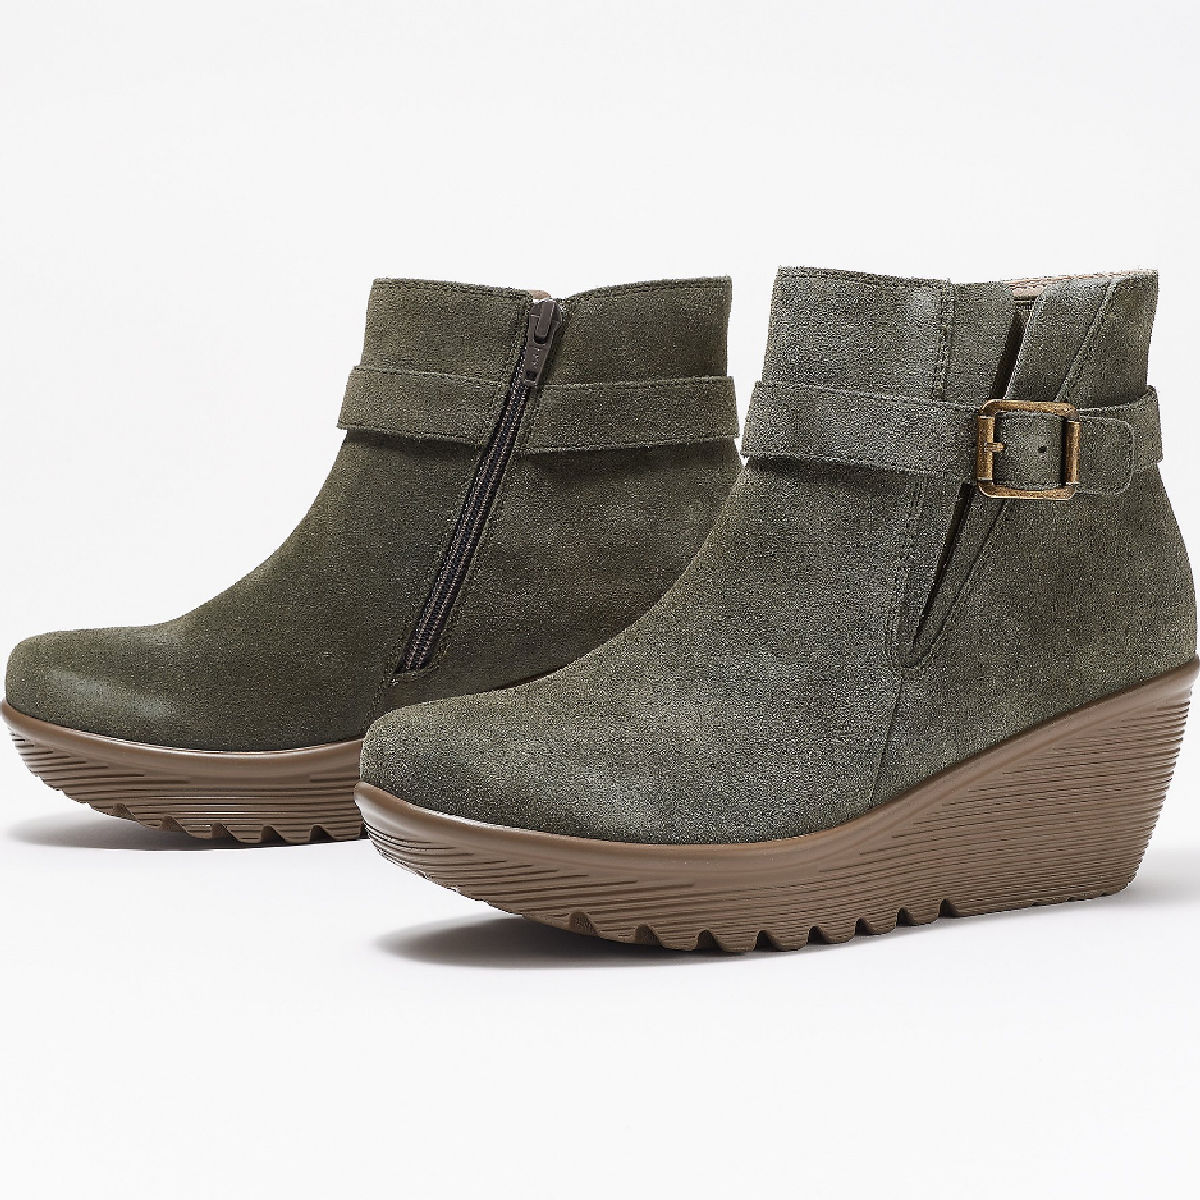 Skechers Day Date Suede Parallel Wedge Ankle Boots